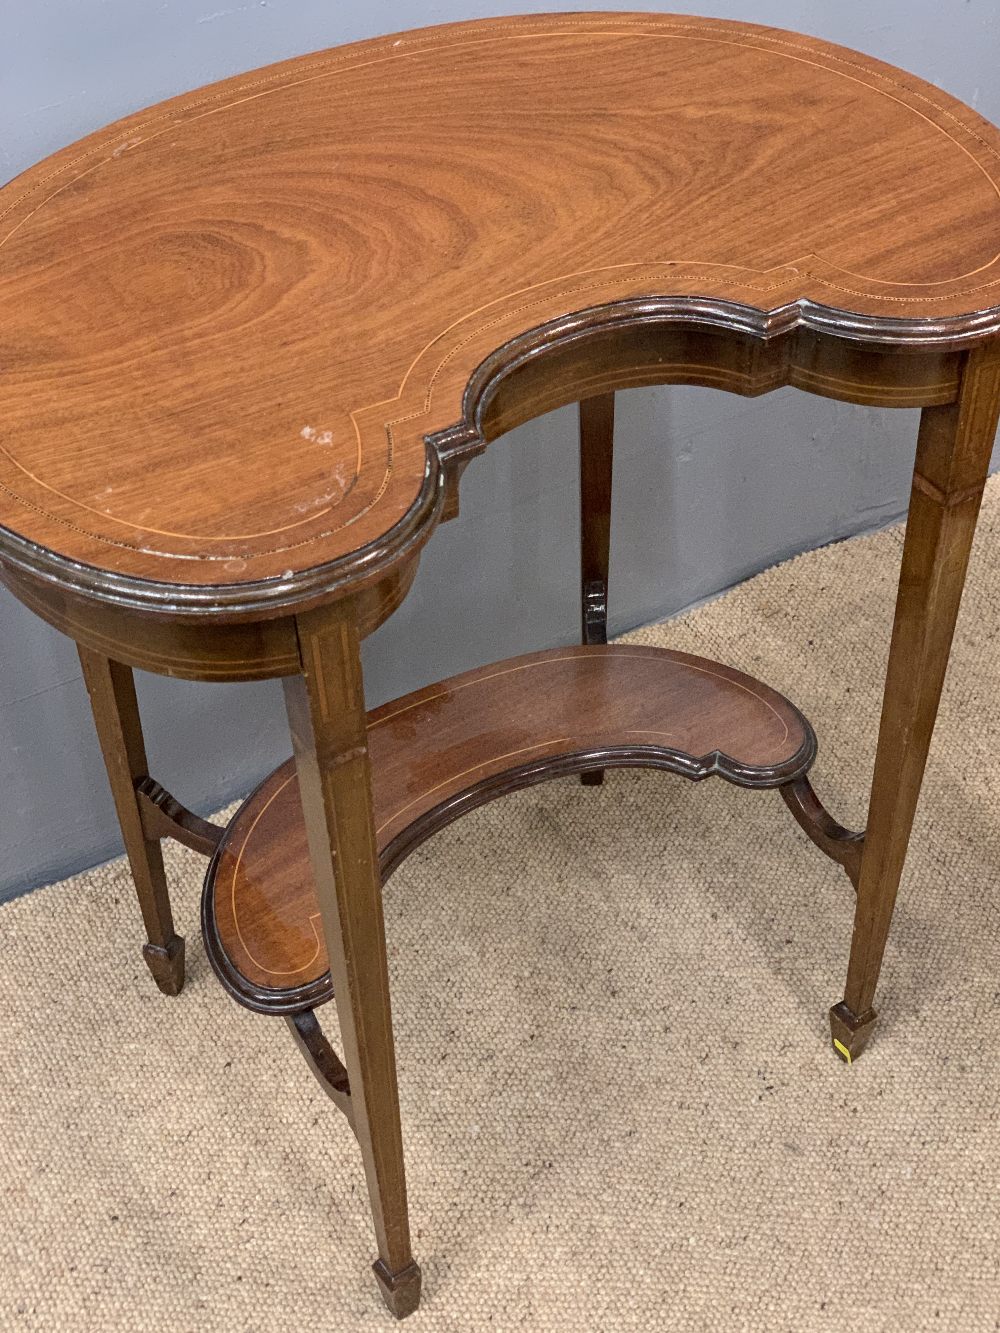 FURNITURE ASSORTMENT (4) - antique mahogany kidney shaped two tier occasional table with inlay - Image 3 of 4